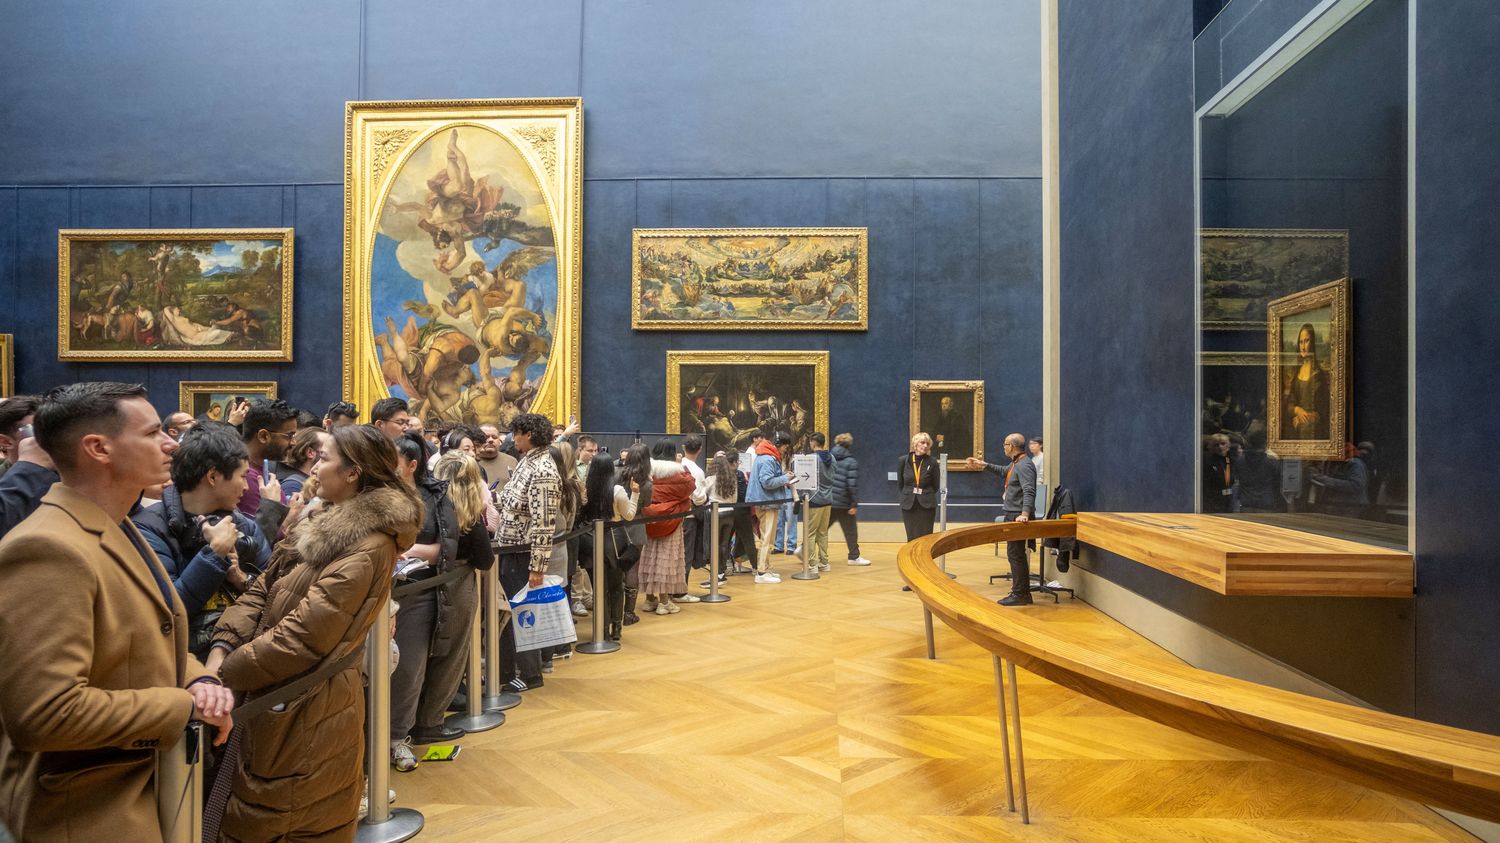 The Louvre plans to better display the Mona Lisa, "in a special room"